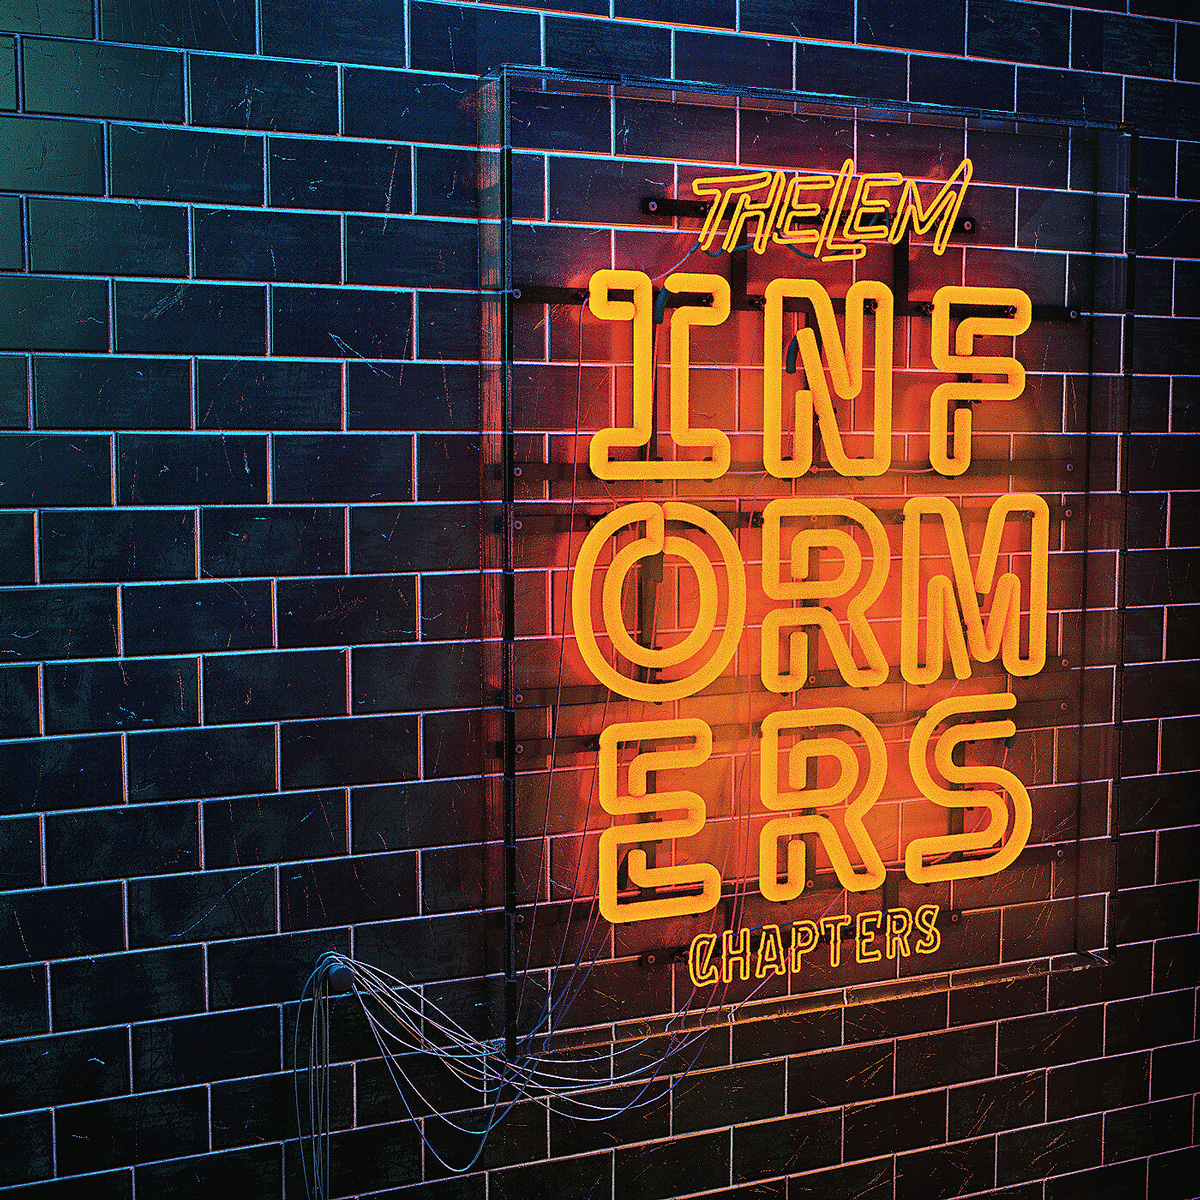 Thelem - Informers